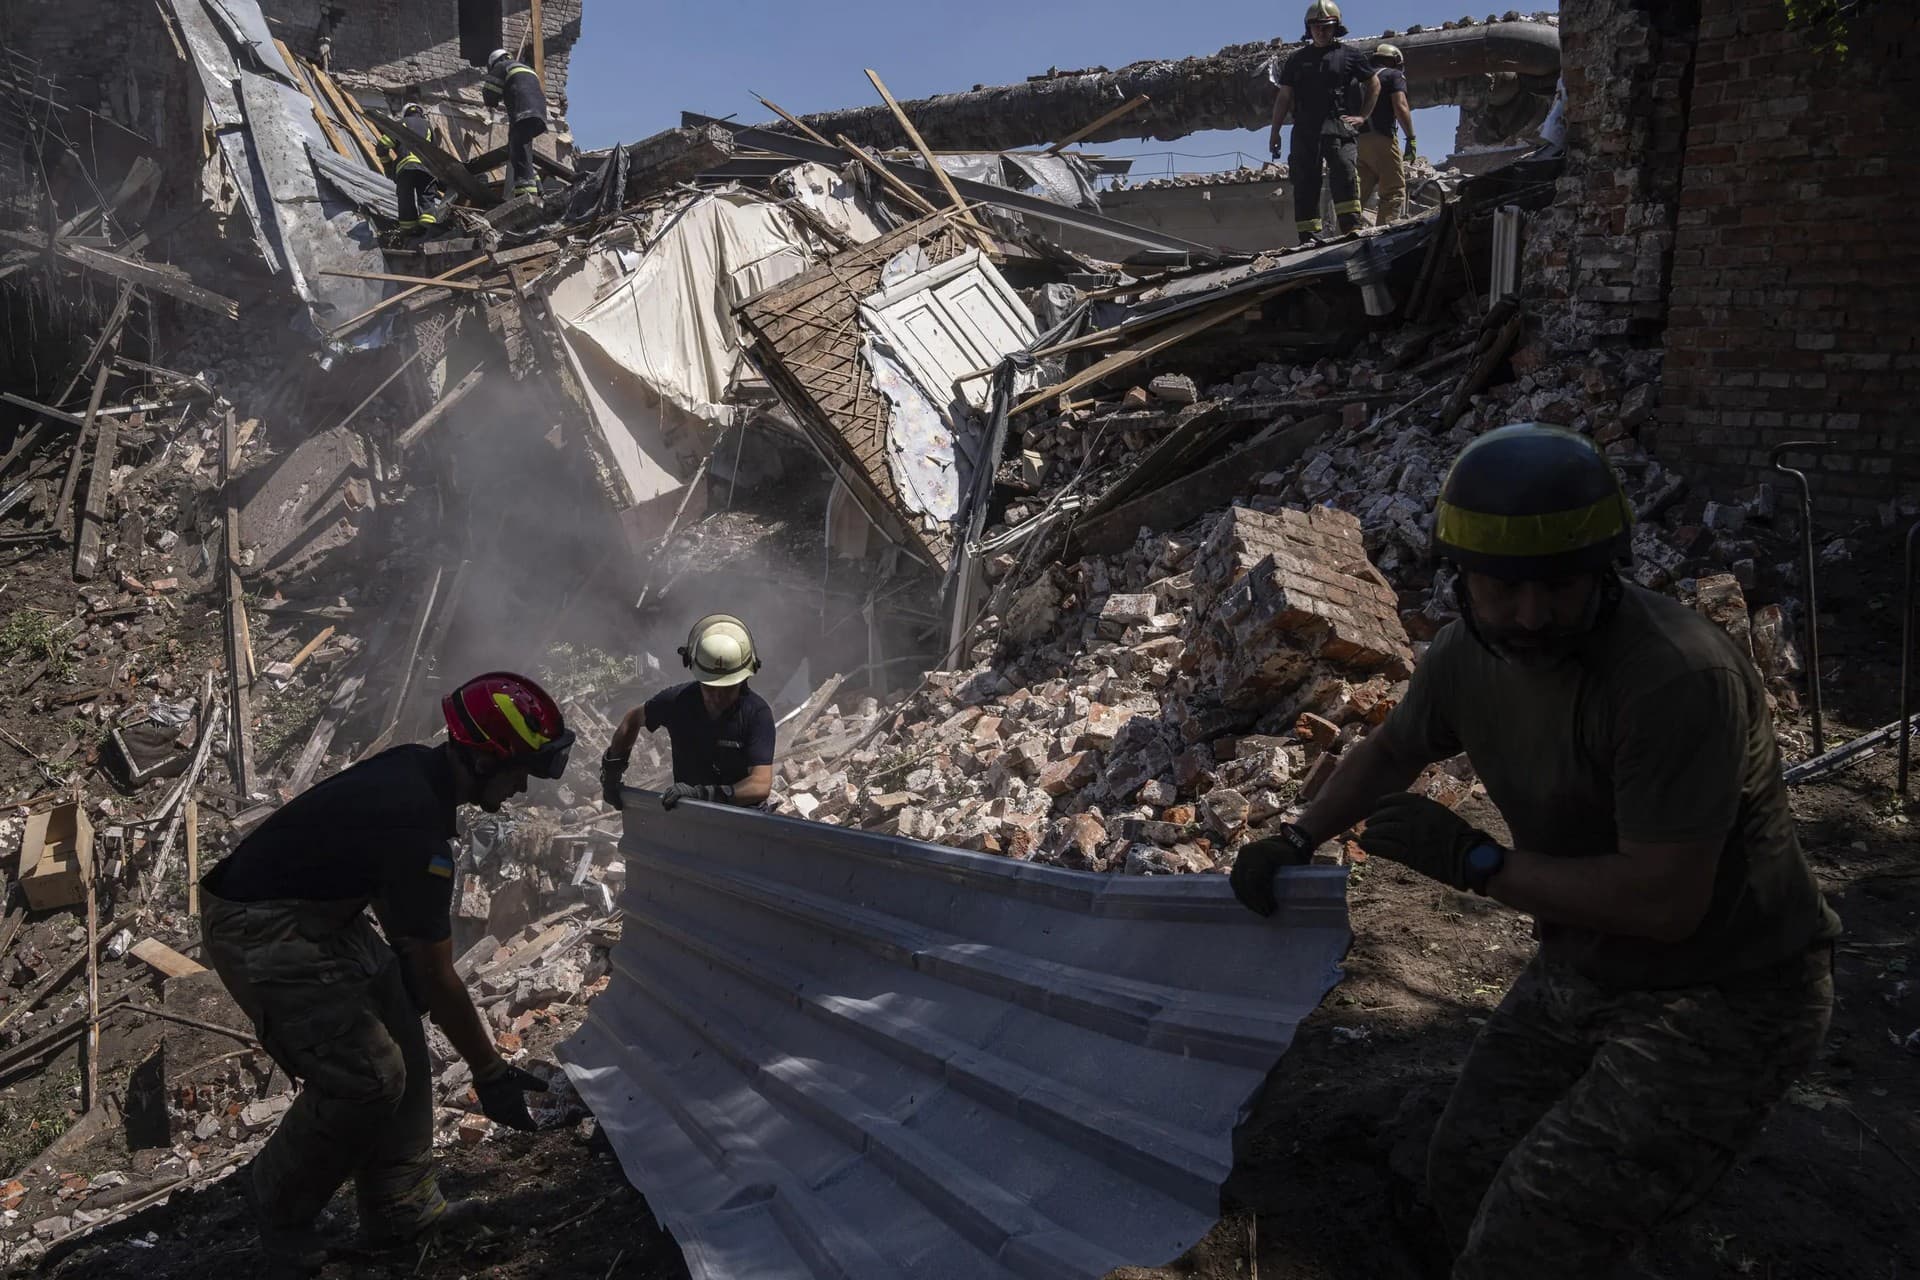 Rescue workers clearing rubble of destroyed house after a Russian attack in a residential neighborhood in downtown Kharkiv